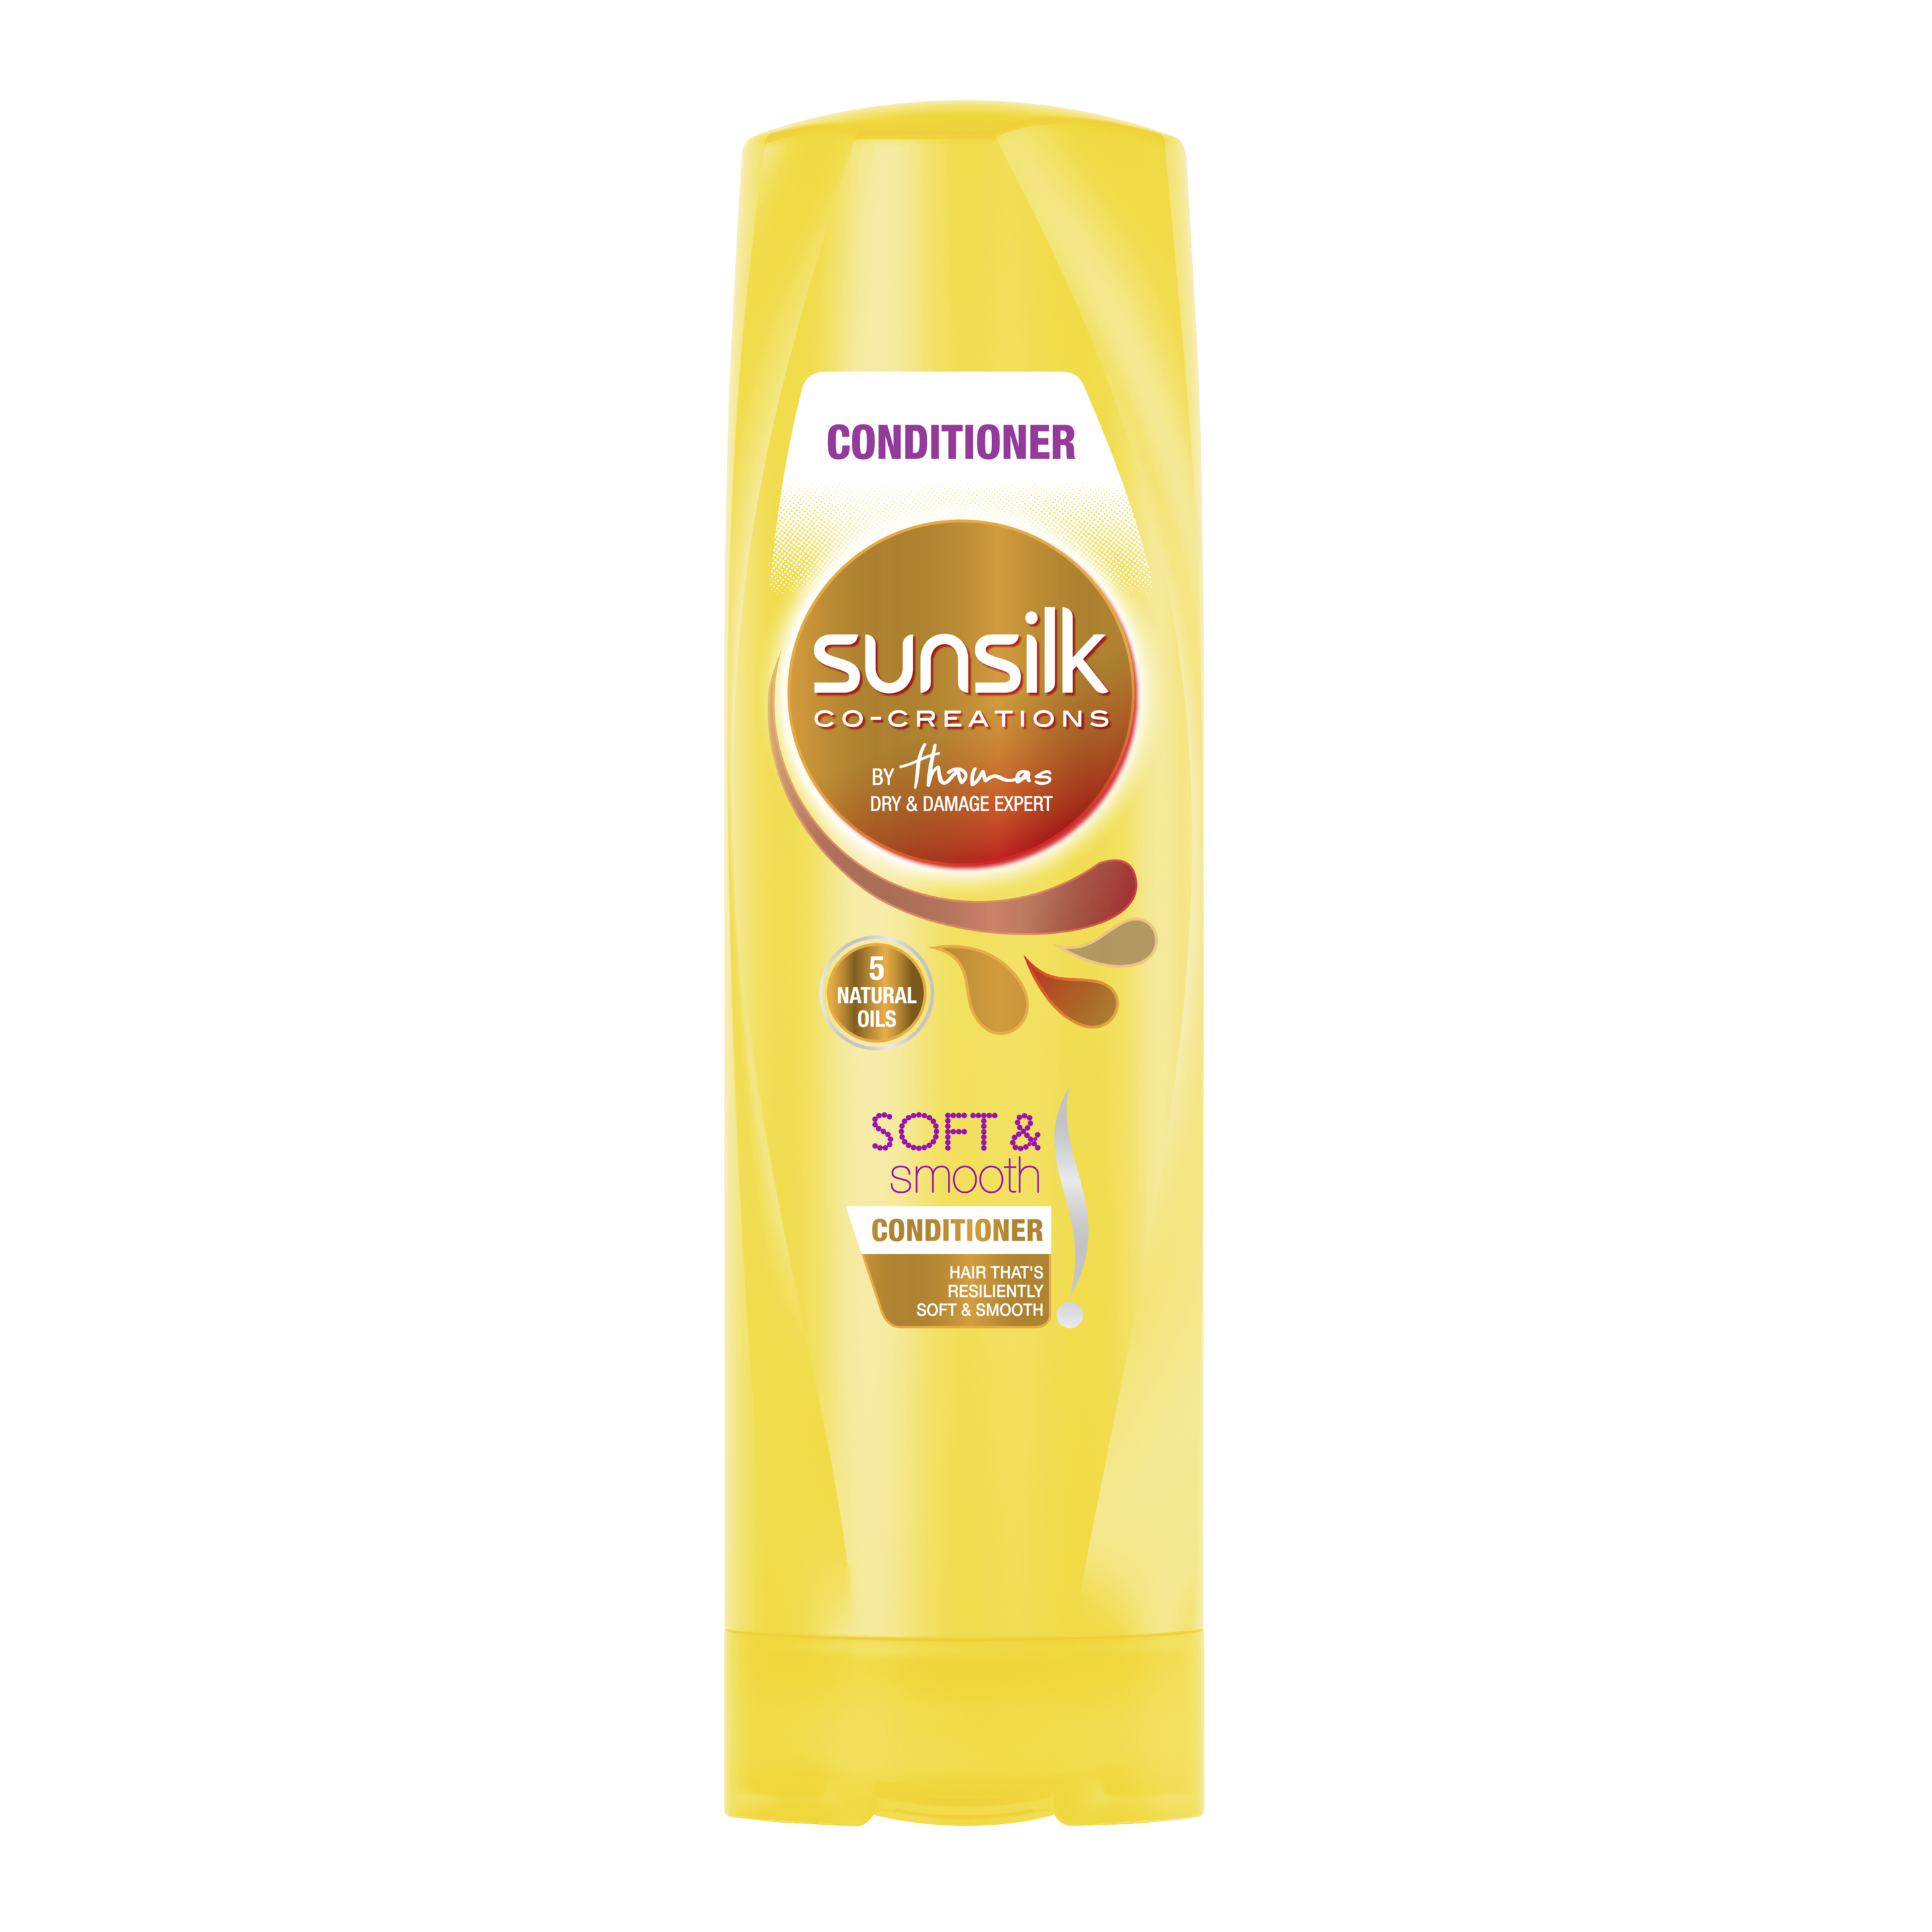 Sunsilk Soft and Smooth Conditioner 320ml front of pack image